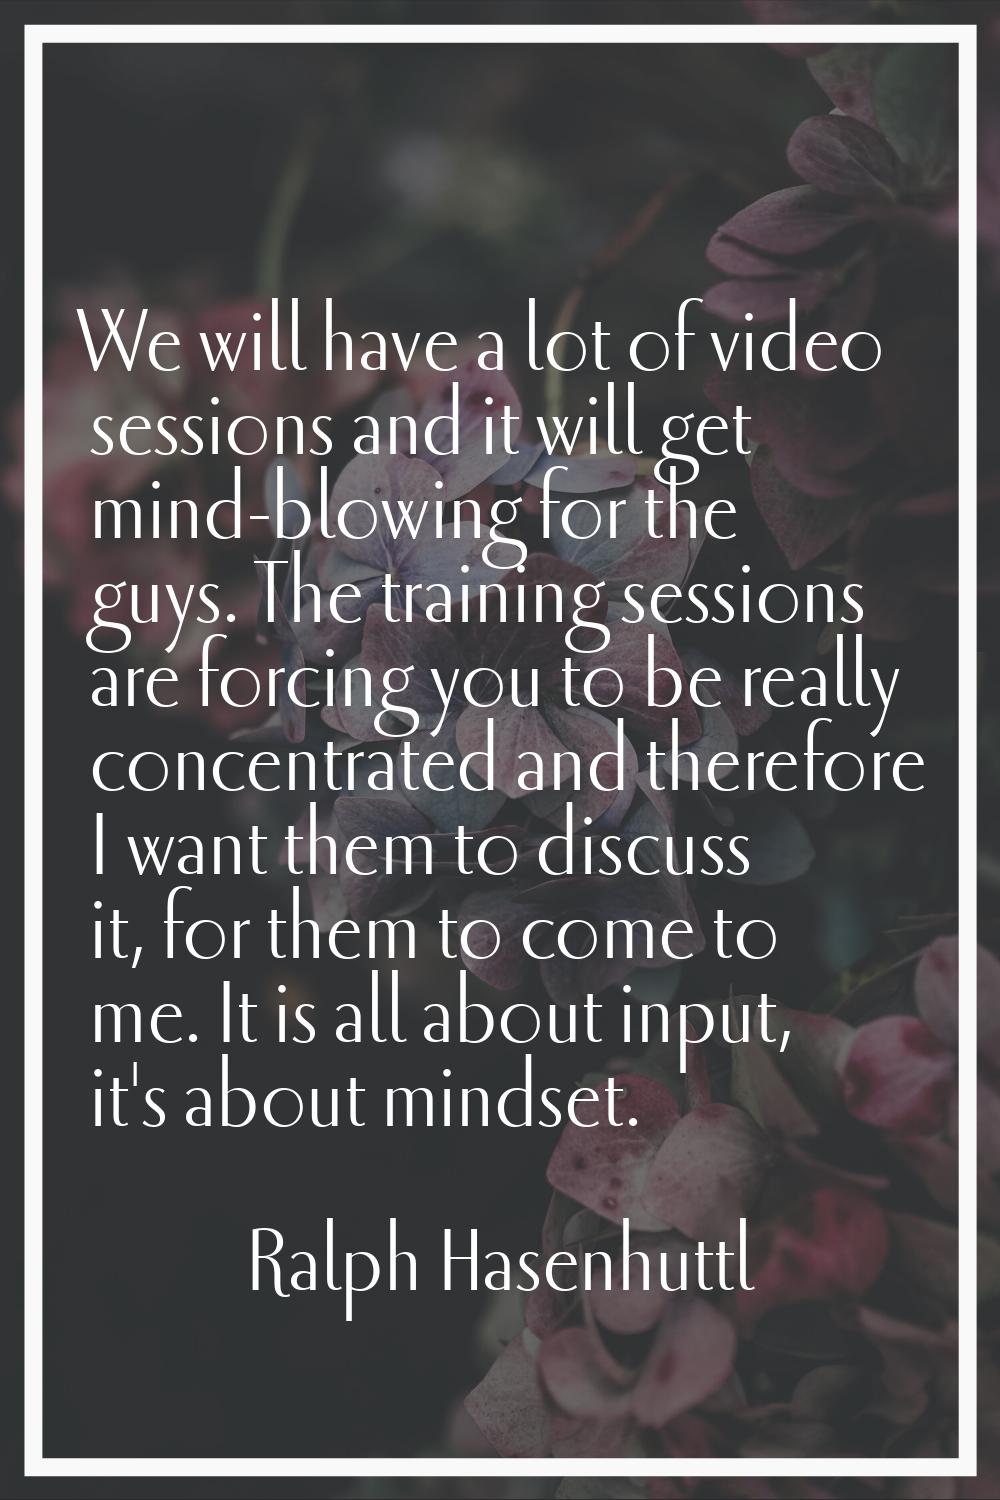 We will have a lot of video sessions and it will get mind-blowing for the guys. The training sessio